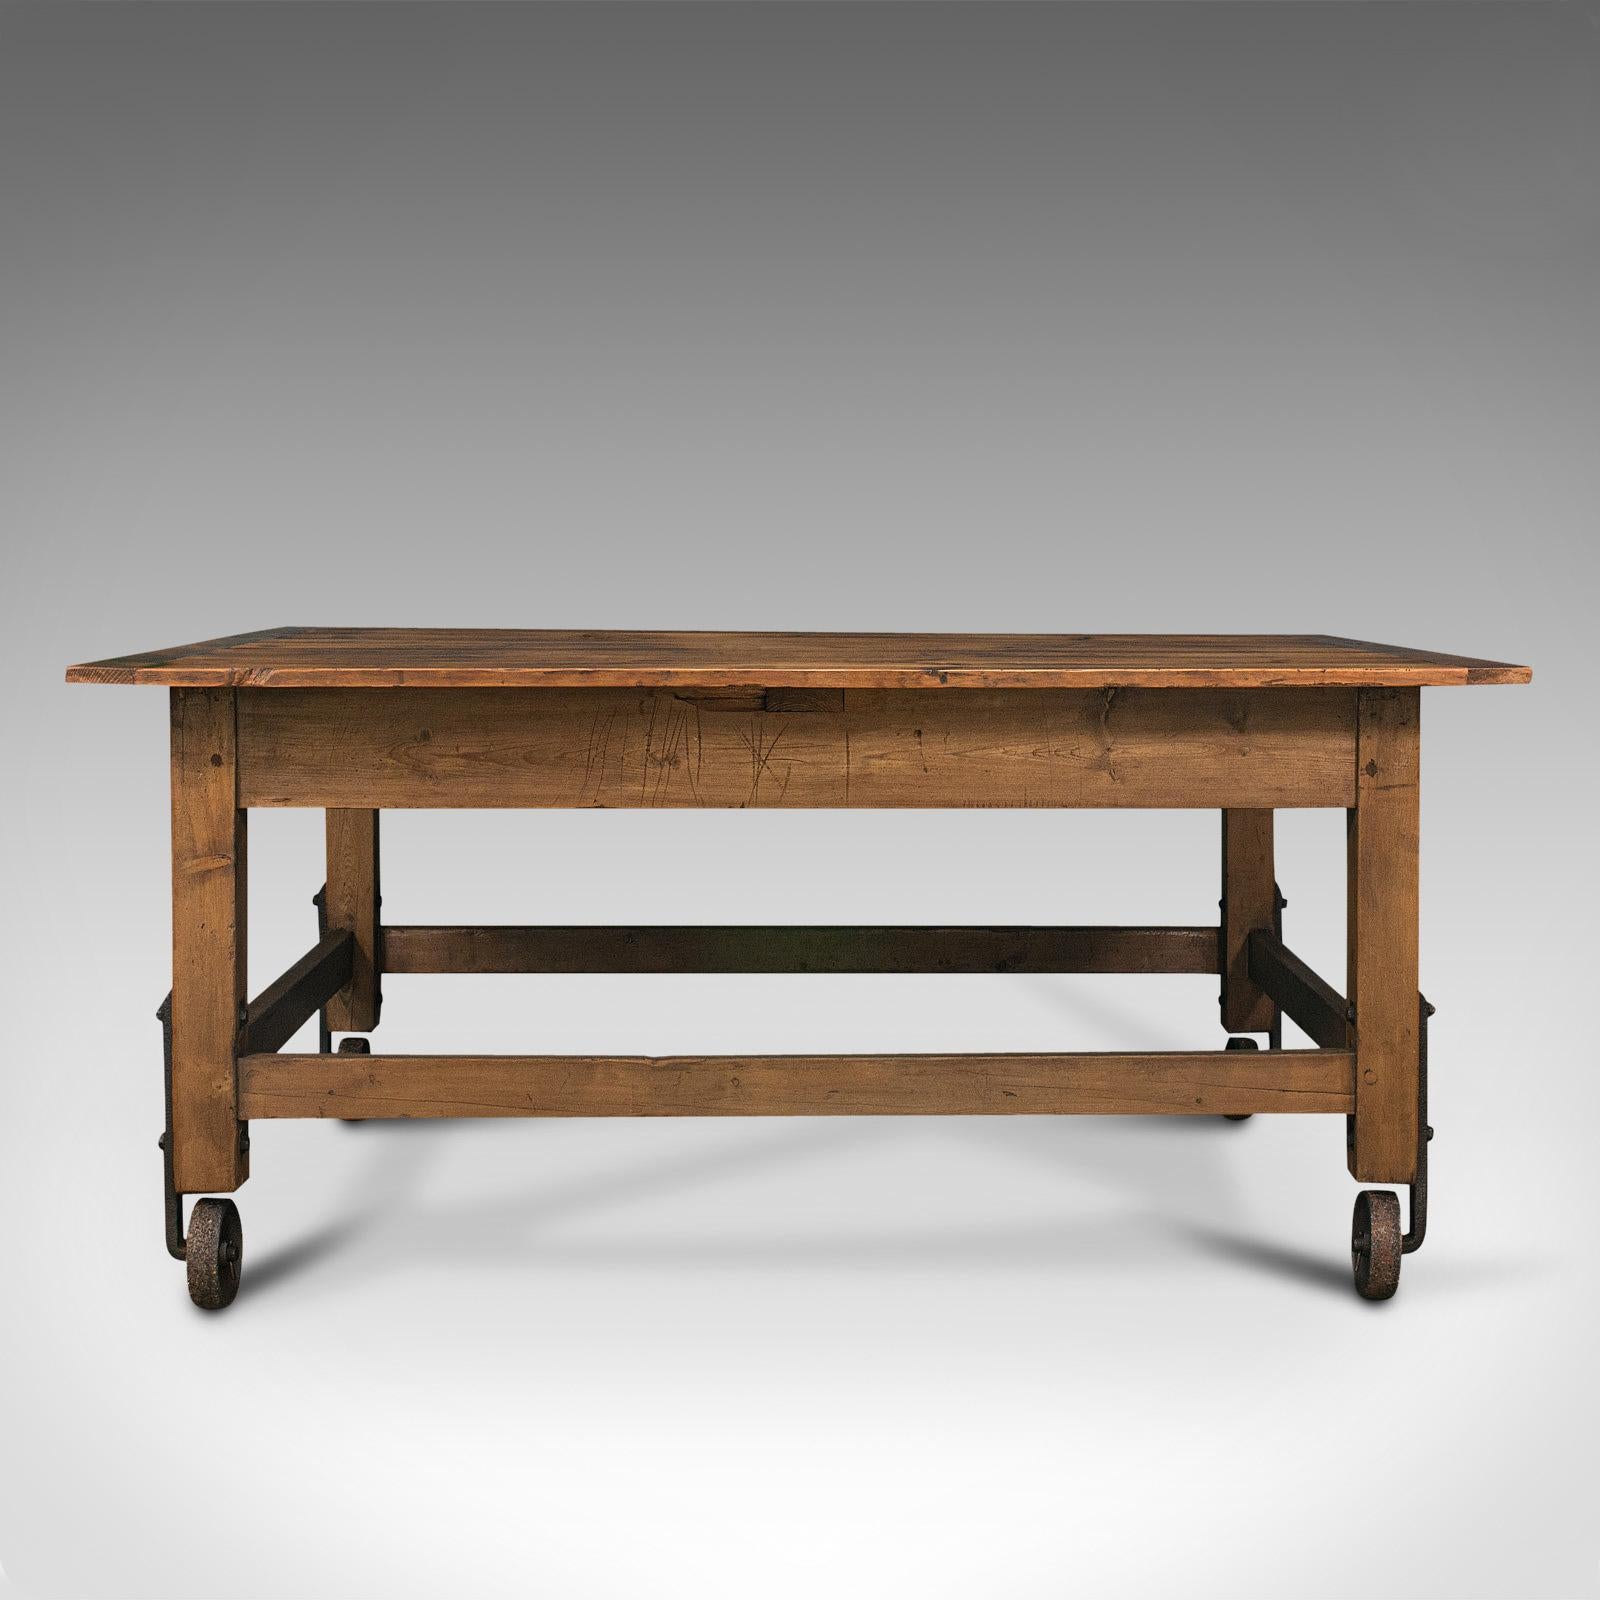 This is an antique boulangerie table. A French, pine shop or bakery display table, dating to the late Victorian period, circa 1880.

Delightful, rolling table for presenting artisan produce or items
Displaying a desirably aged patina